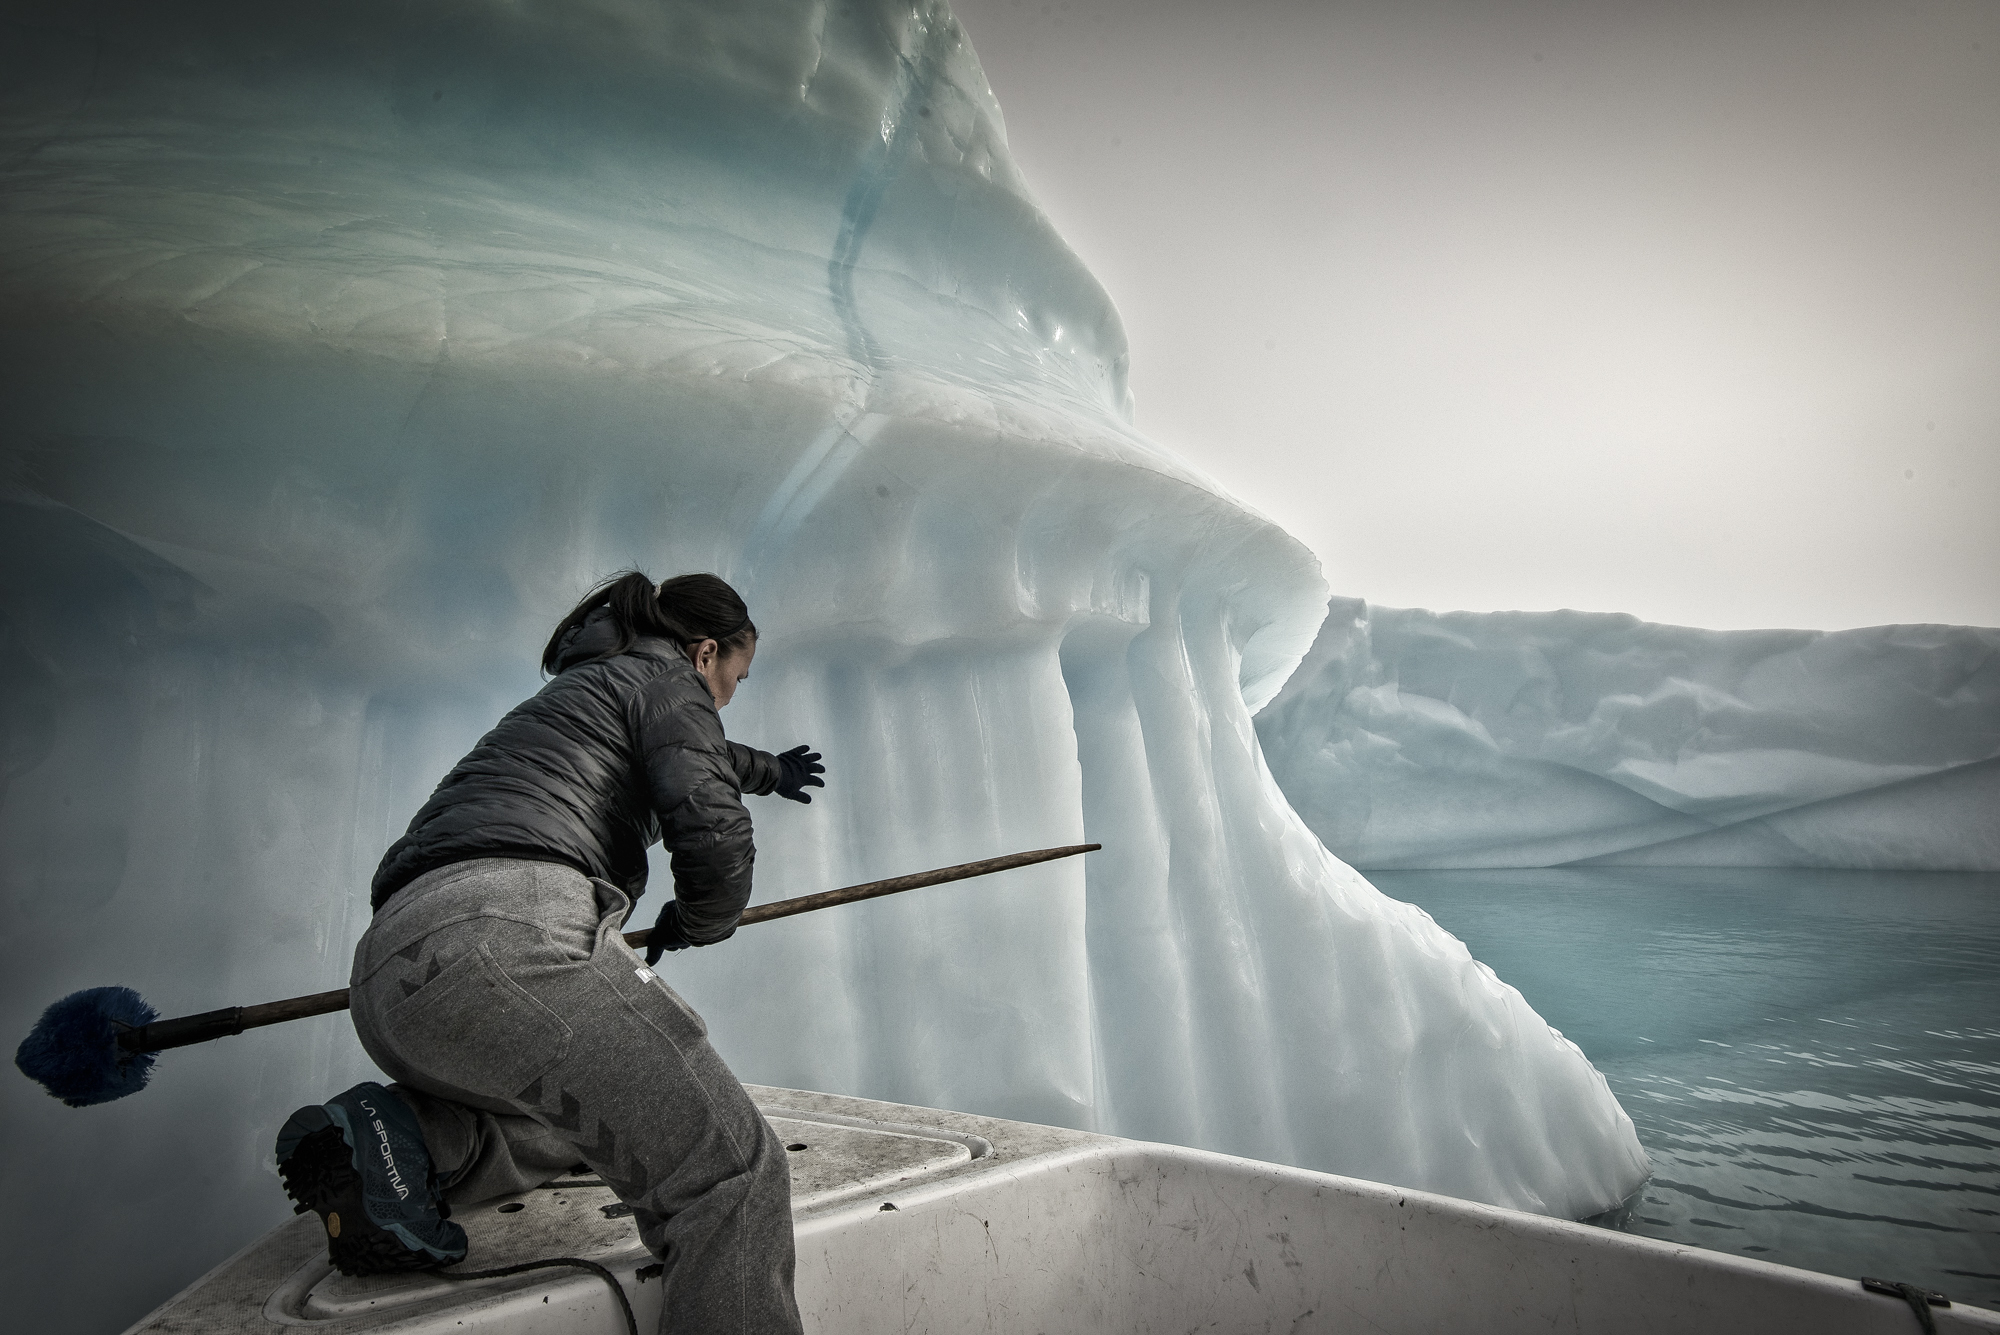 A person in jeans and a puffer jacket carrying an oar, at the front of a small boat, pushing an iceberg that's so big the top is out of shot, in a pale-blue icy seascape